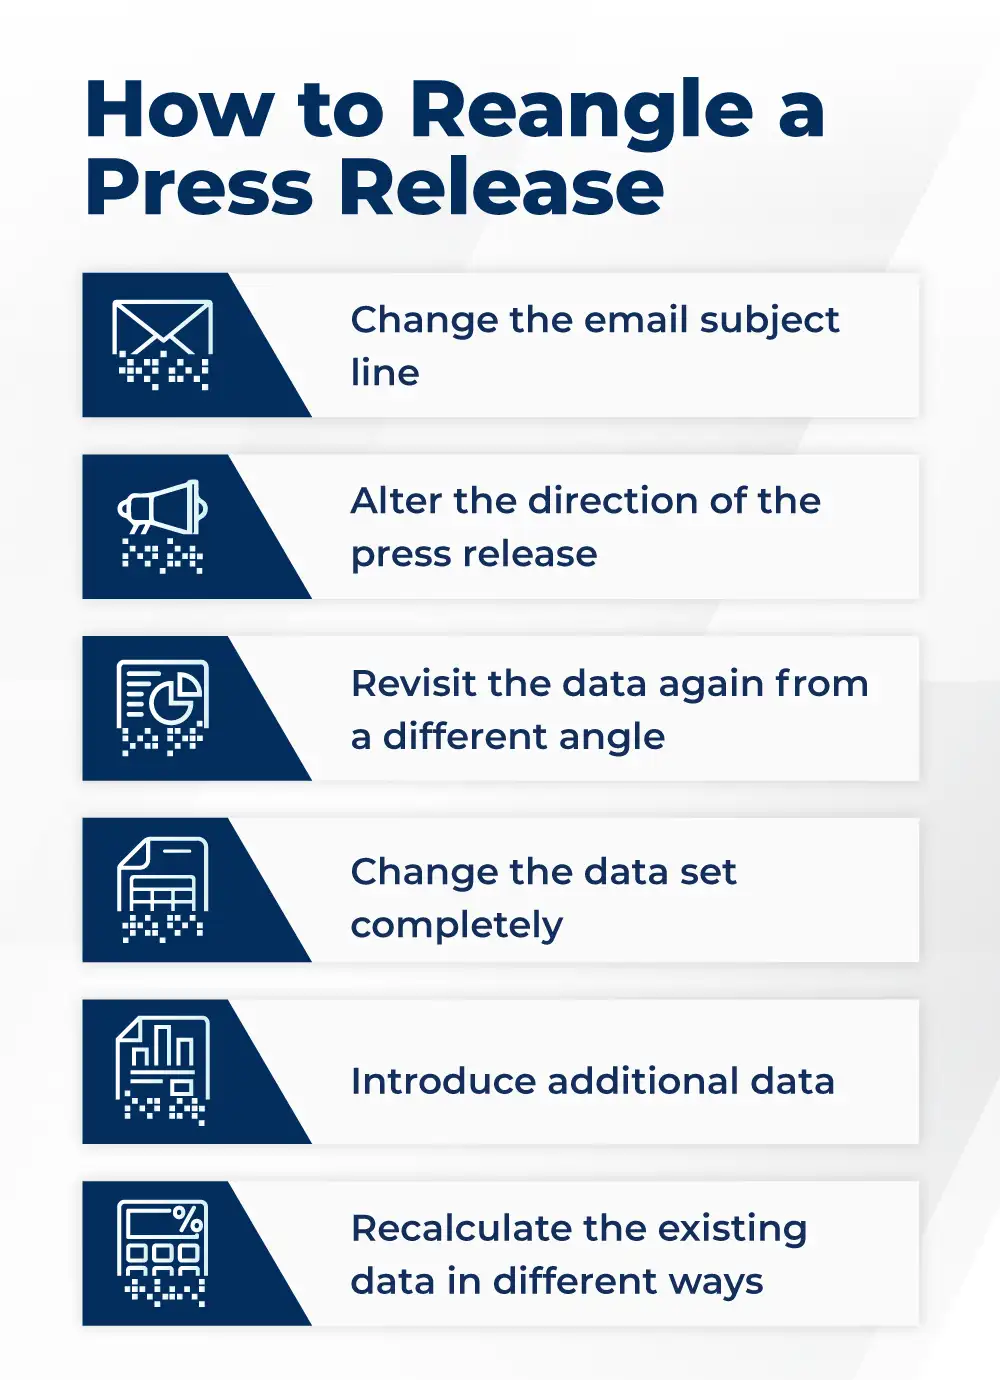 How to reangle a press release